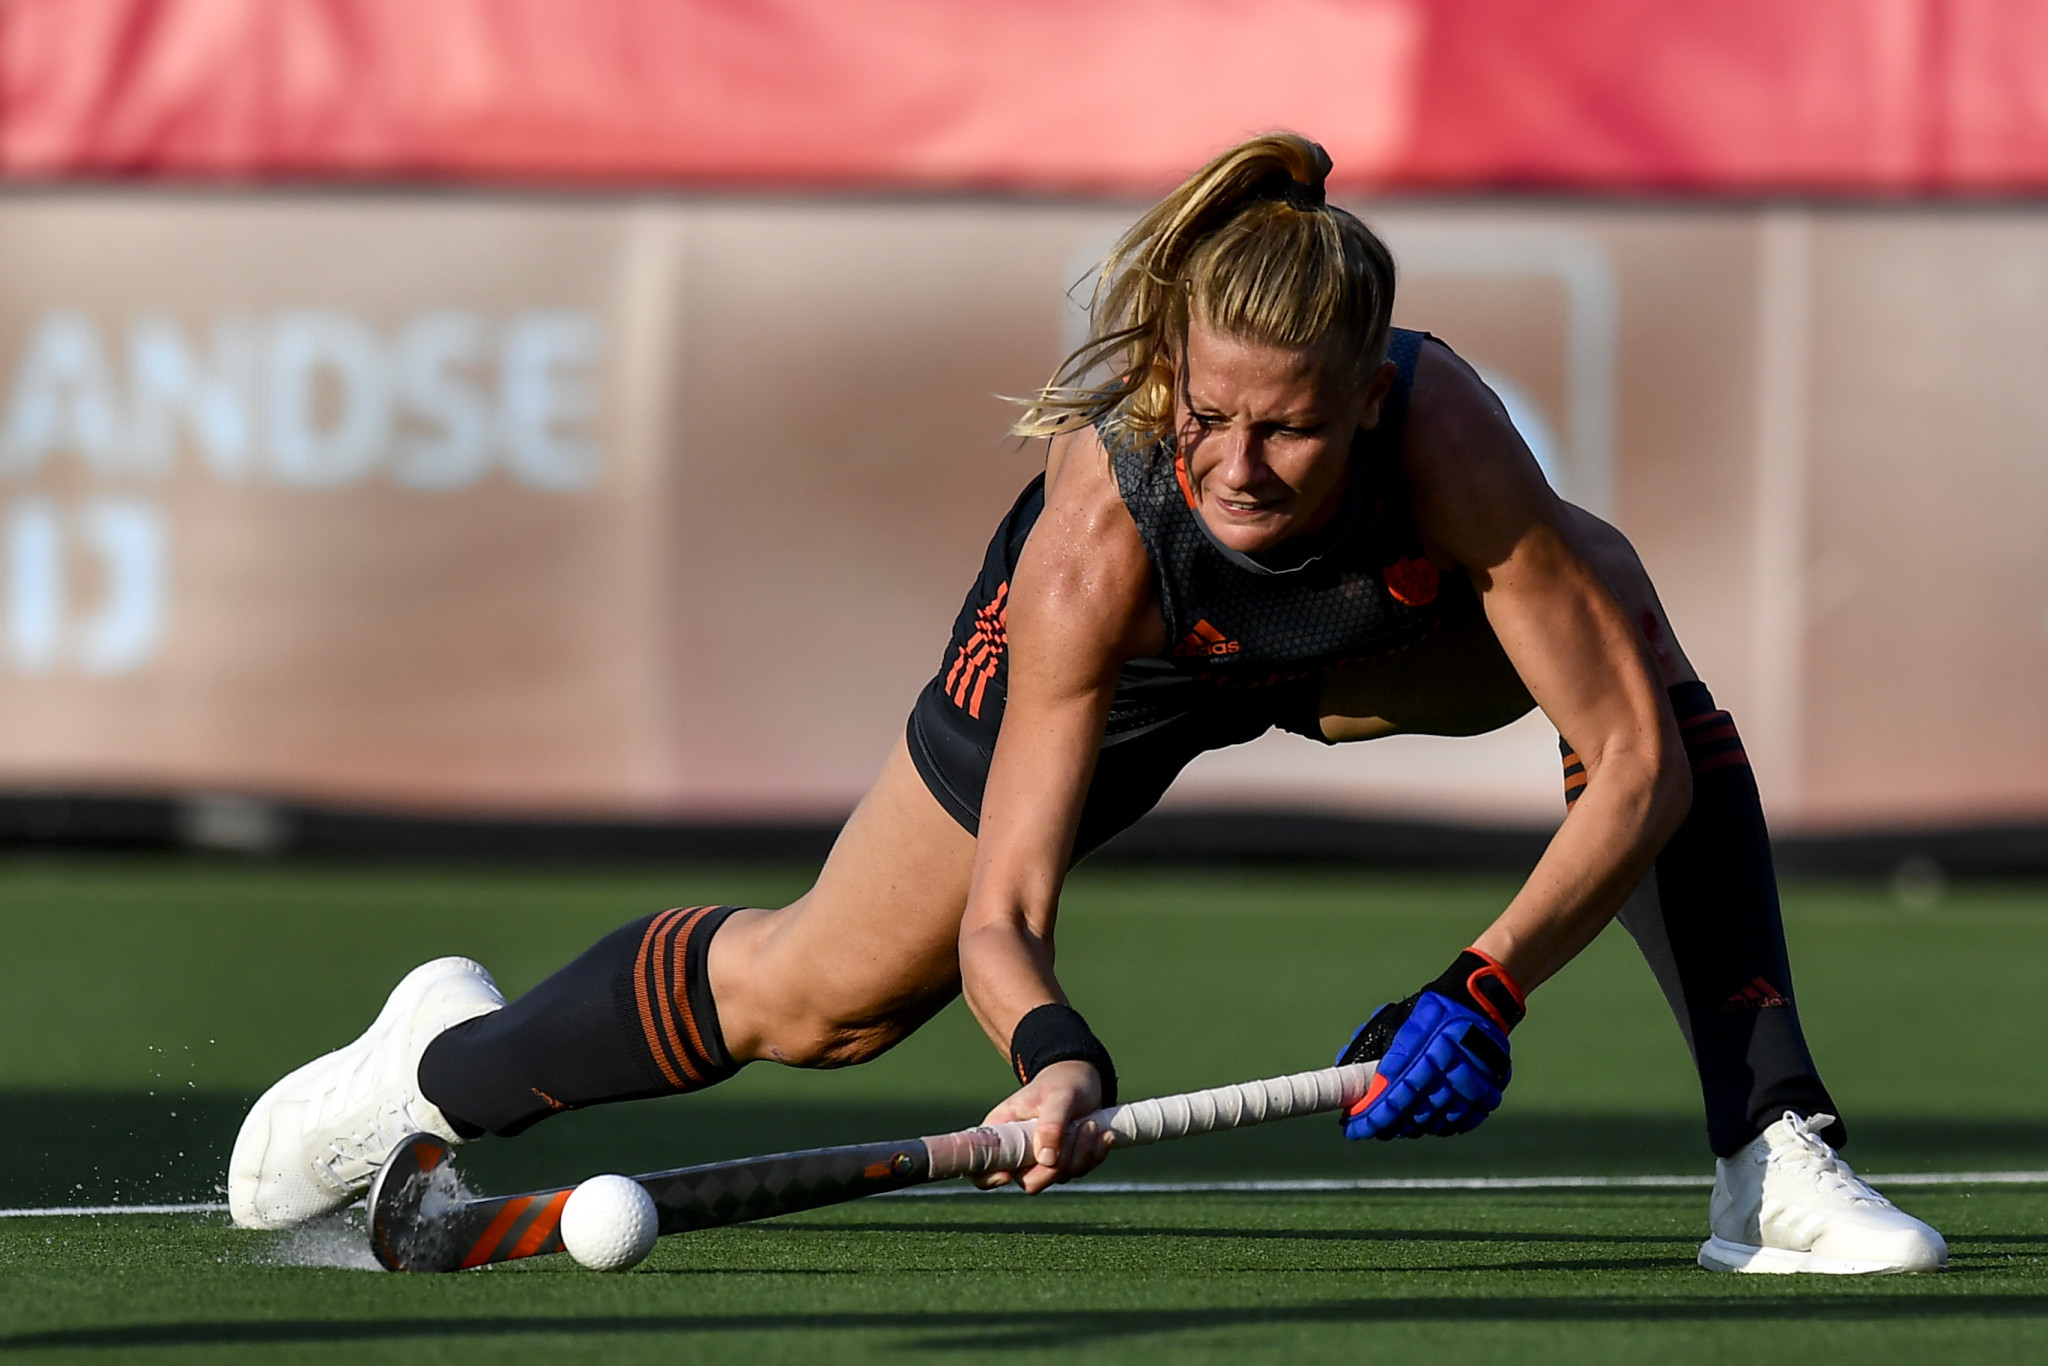 Dutch defending champions secure third consecutive win in FIH Pro League